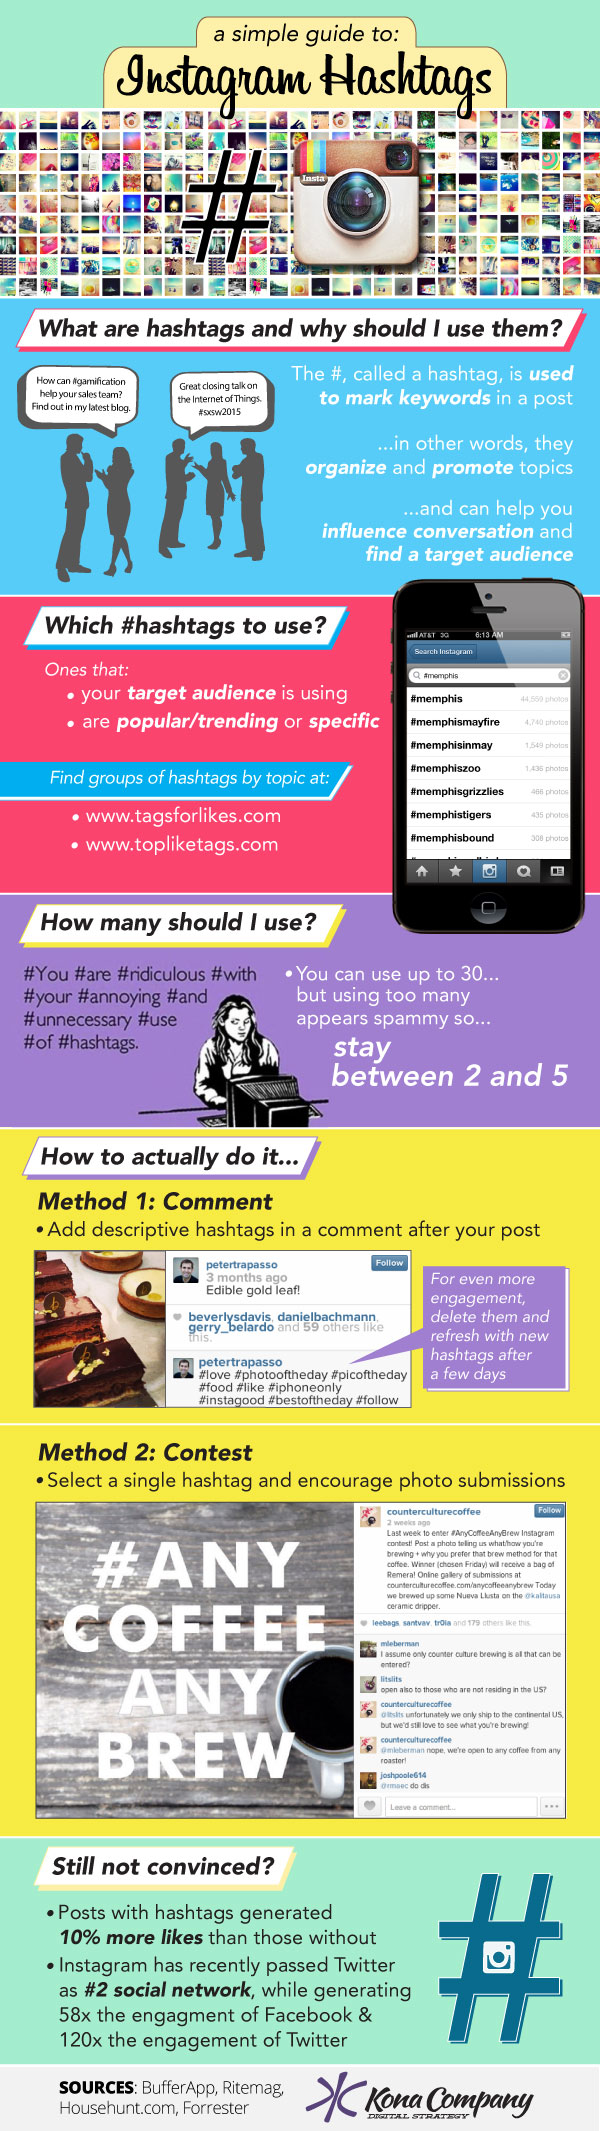 Cool-Hashtag-Marketing-Tips-For-Instagram